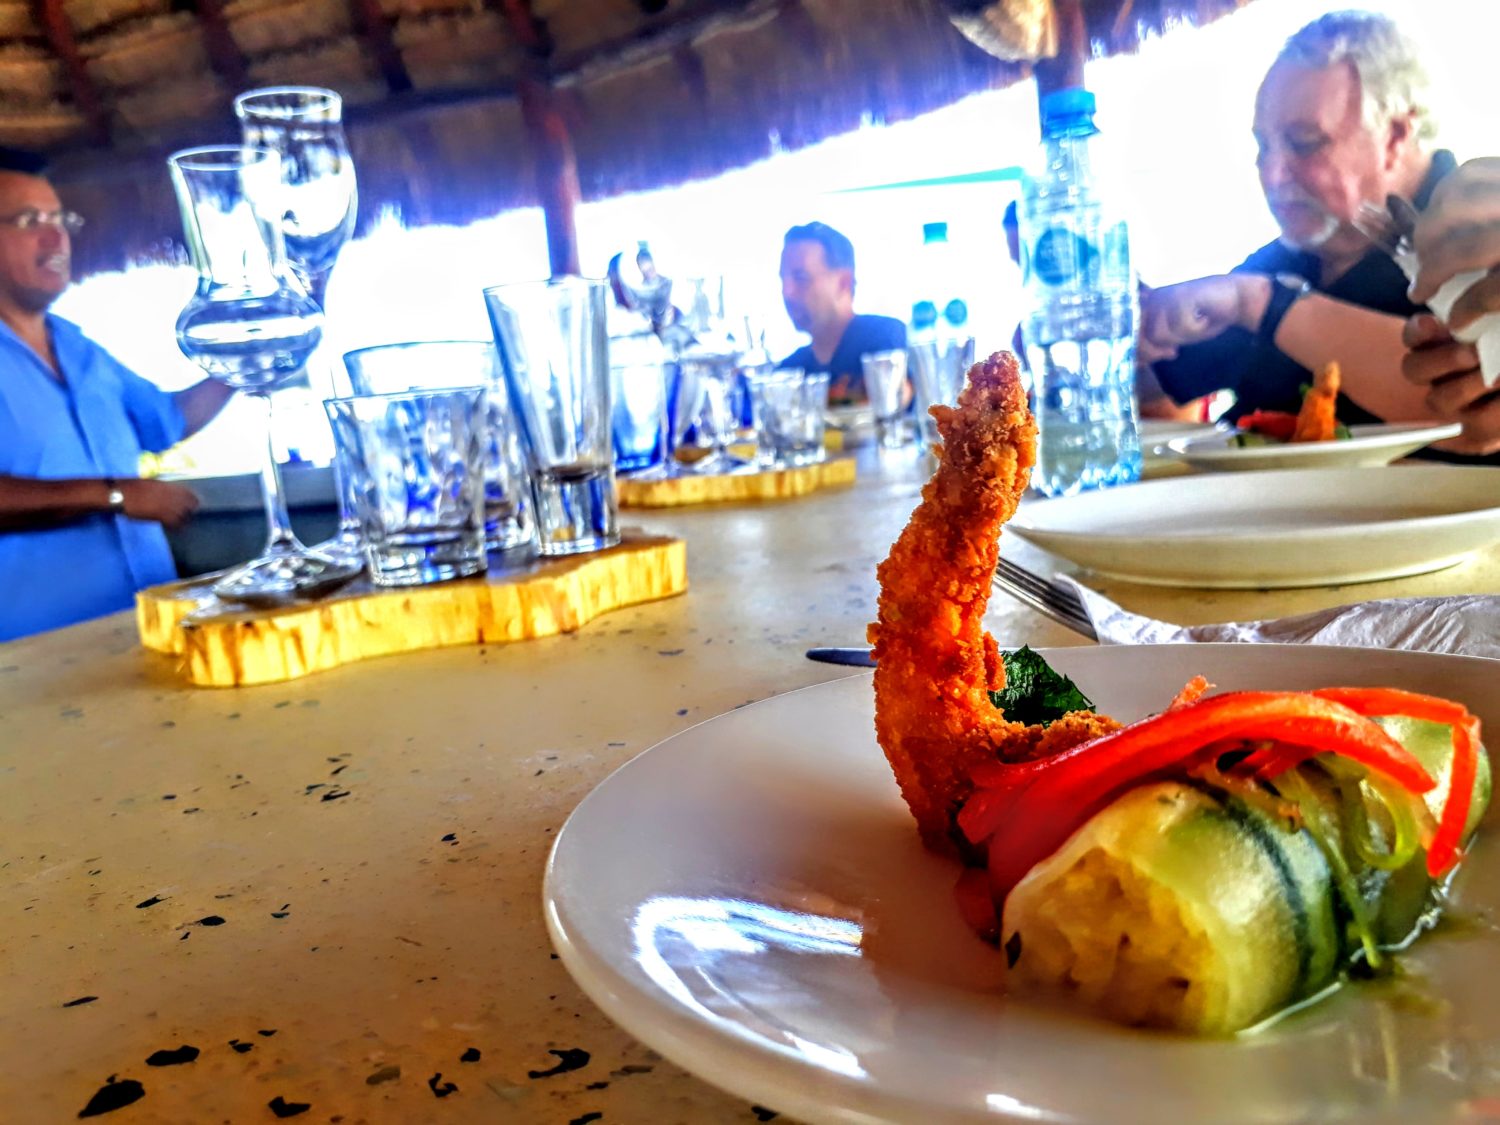 Shrimp and veggie appetizer served to students at La Sirena Puerto Morelos during Tequila University.